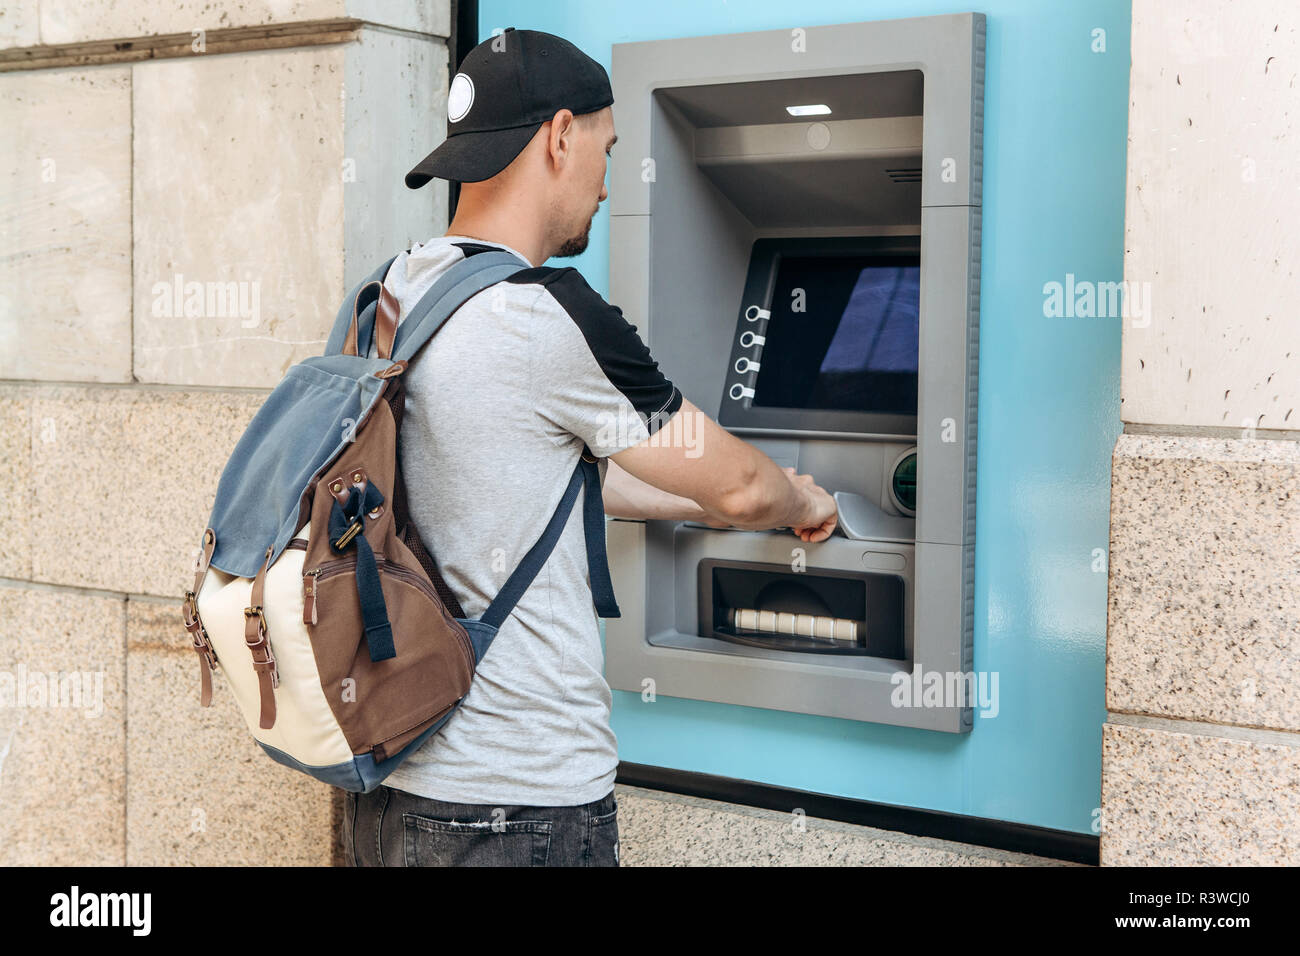 The tourist withdraws money from the ATM for further travel. Finance, credit card, withdrawal of money. Life style. Journey. Vacation. Grabs a card from the ATM. Stock Photo